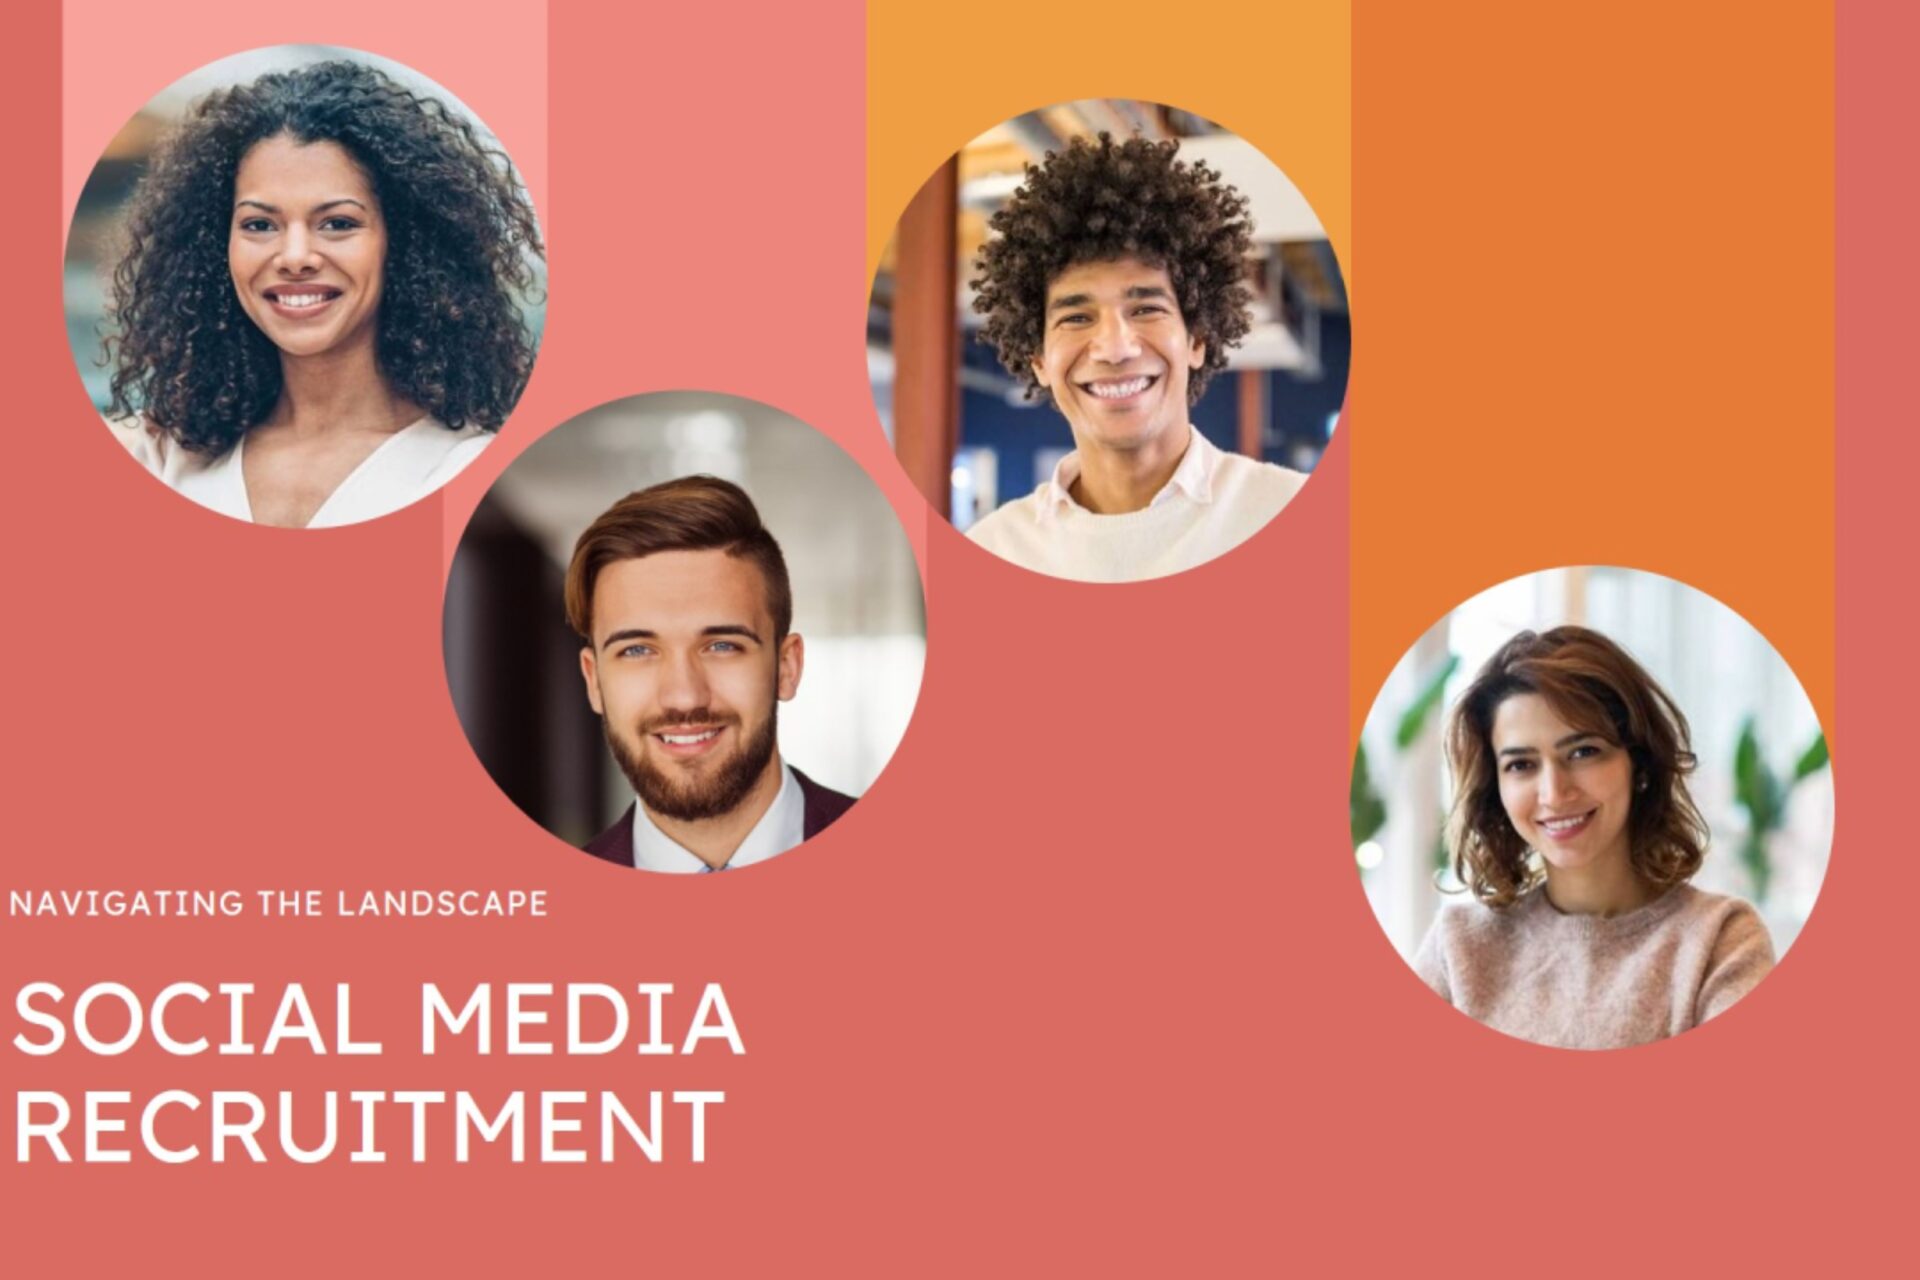 From Likes to Hires: Navigating the Recruitment Landscape Through Social Media